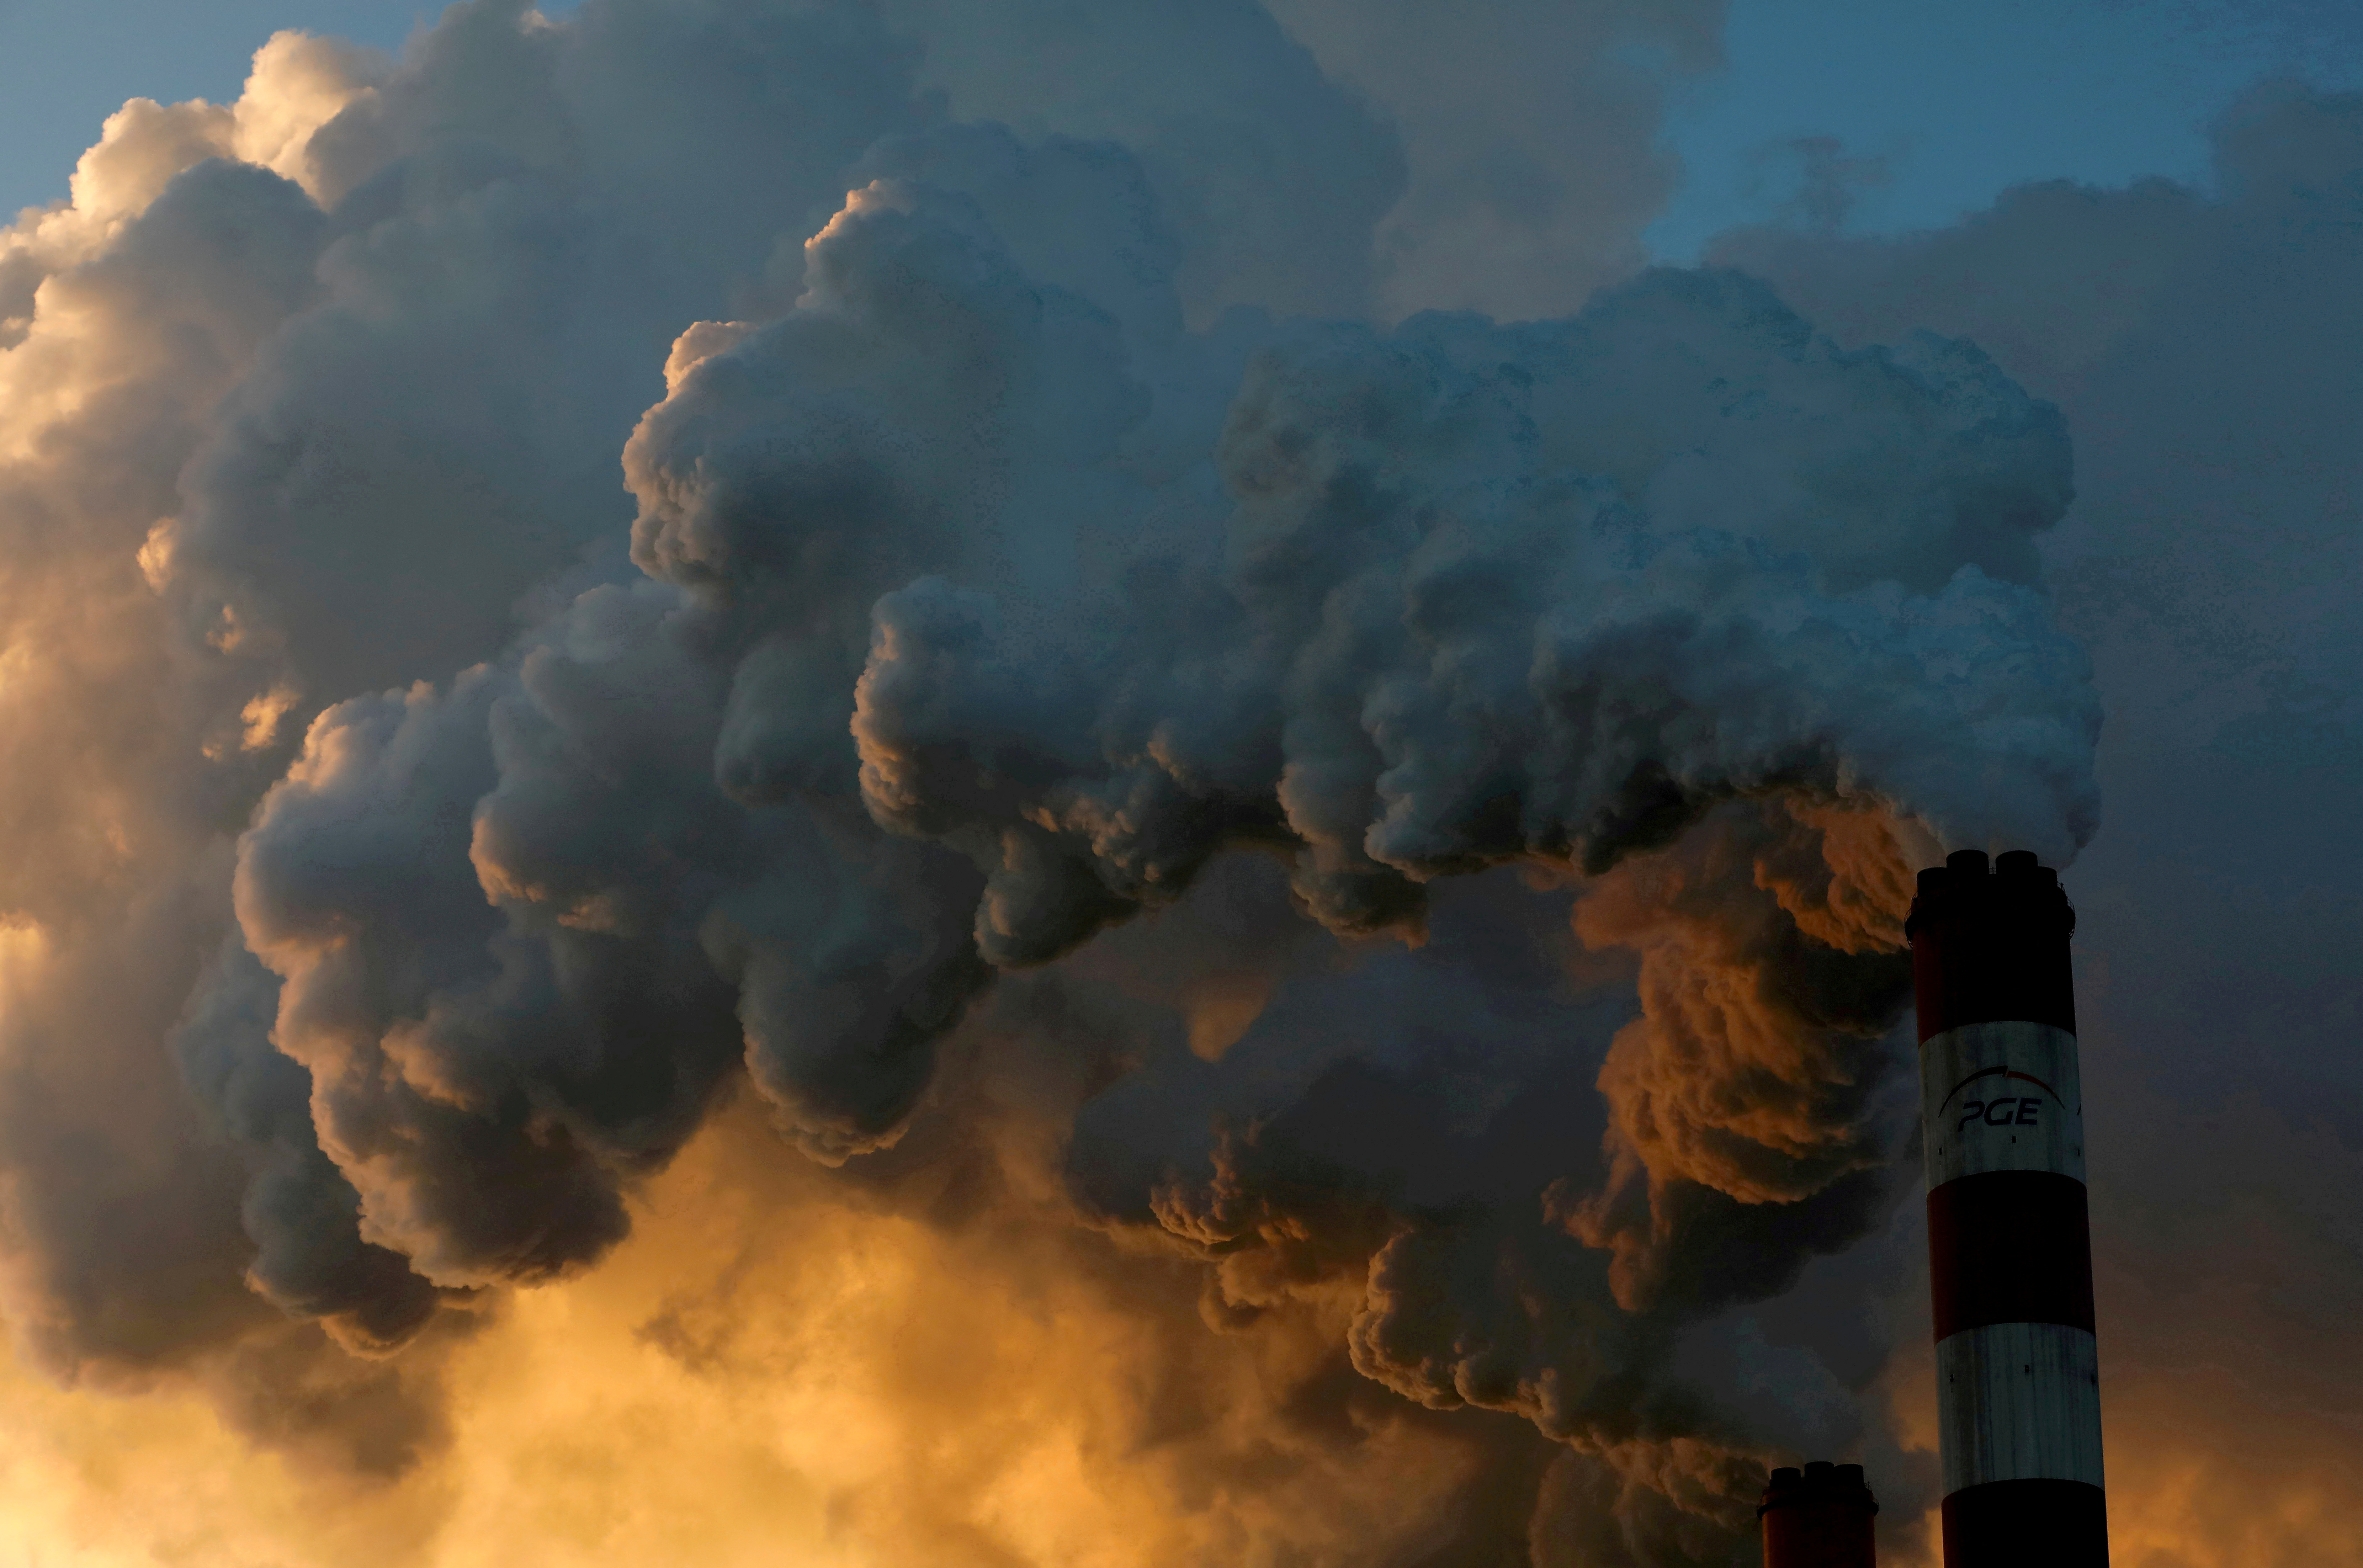 Smoke and steam billow from Belchatow Power Station, Europe's largest coal-fired power plant, near Belchatow